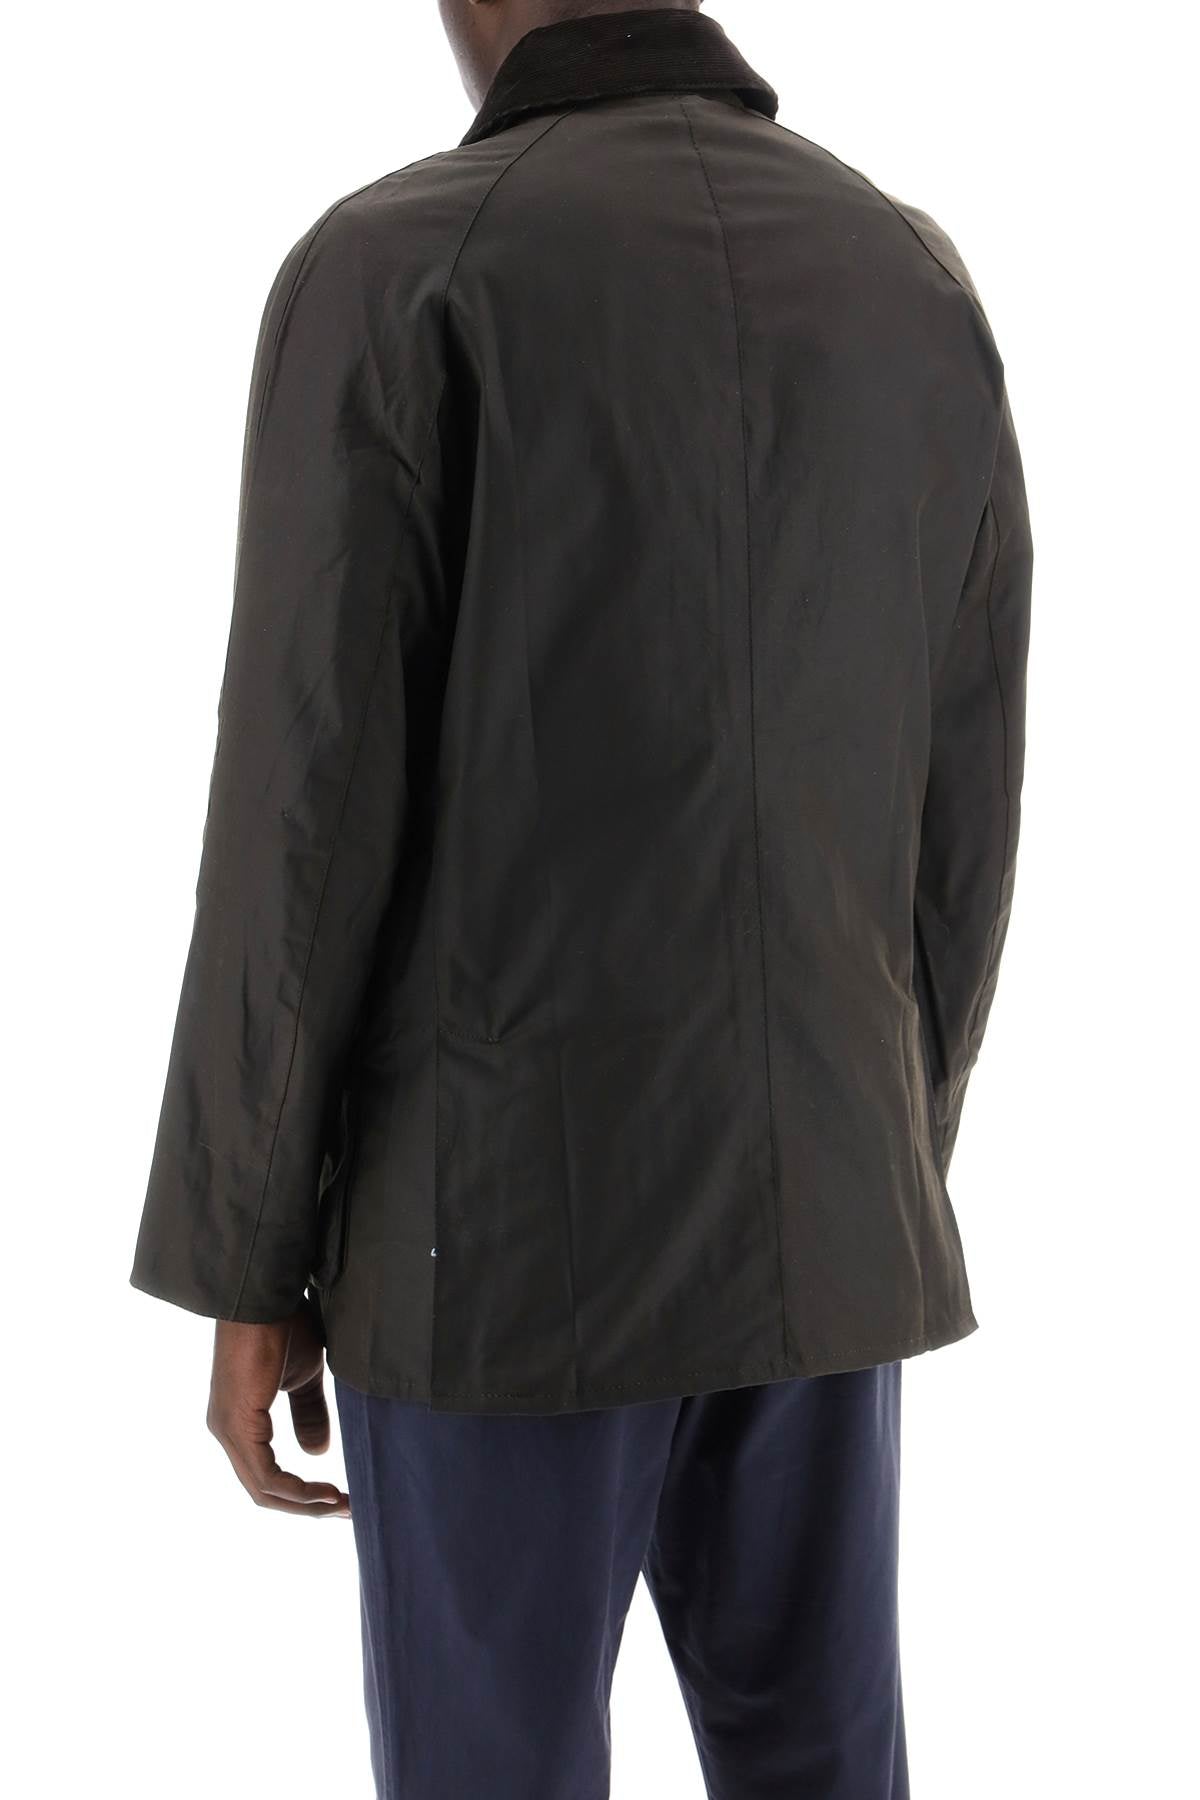 Barbour ashby waxed jacket-2